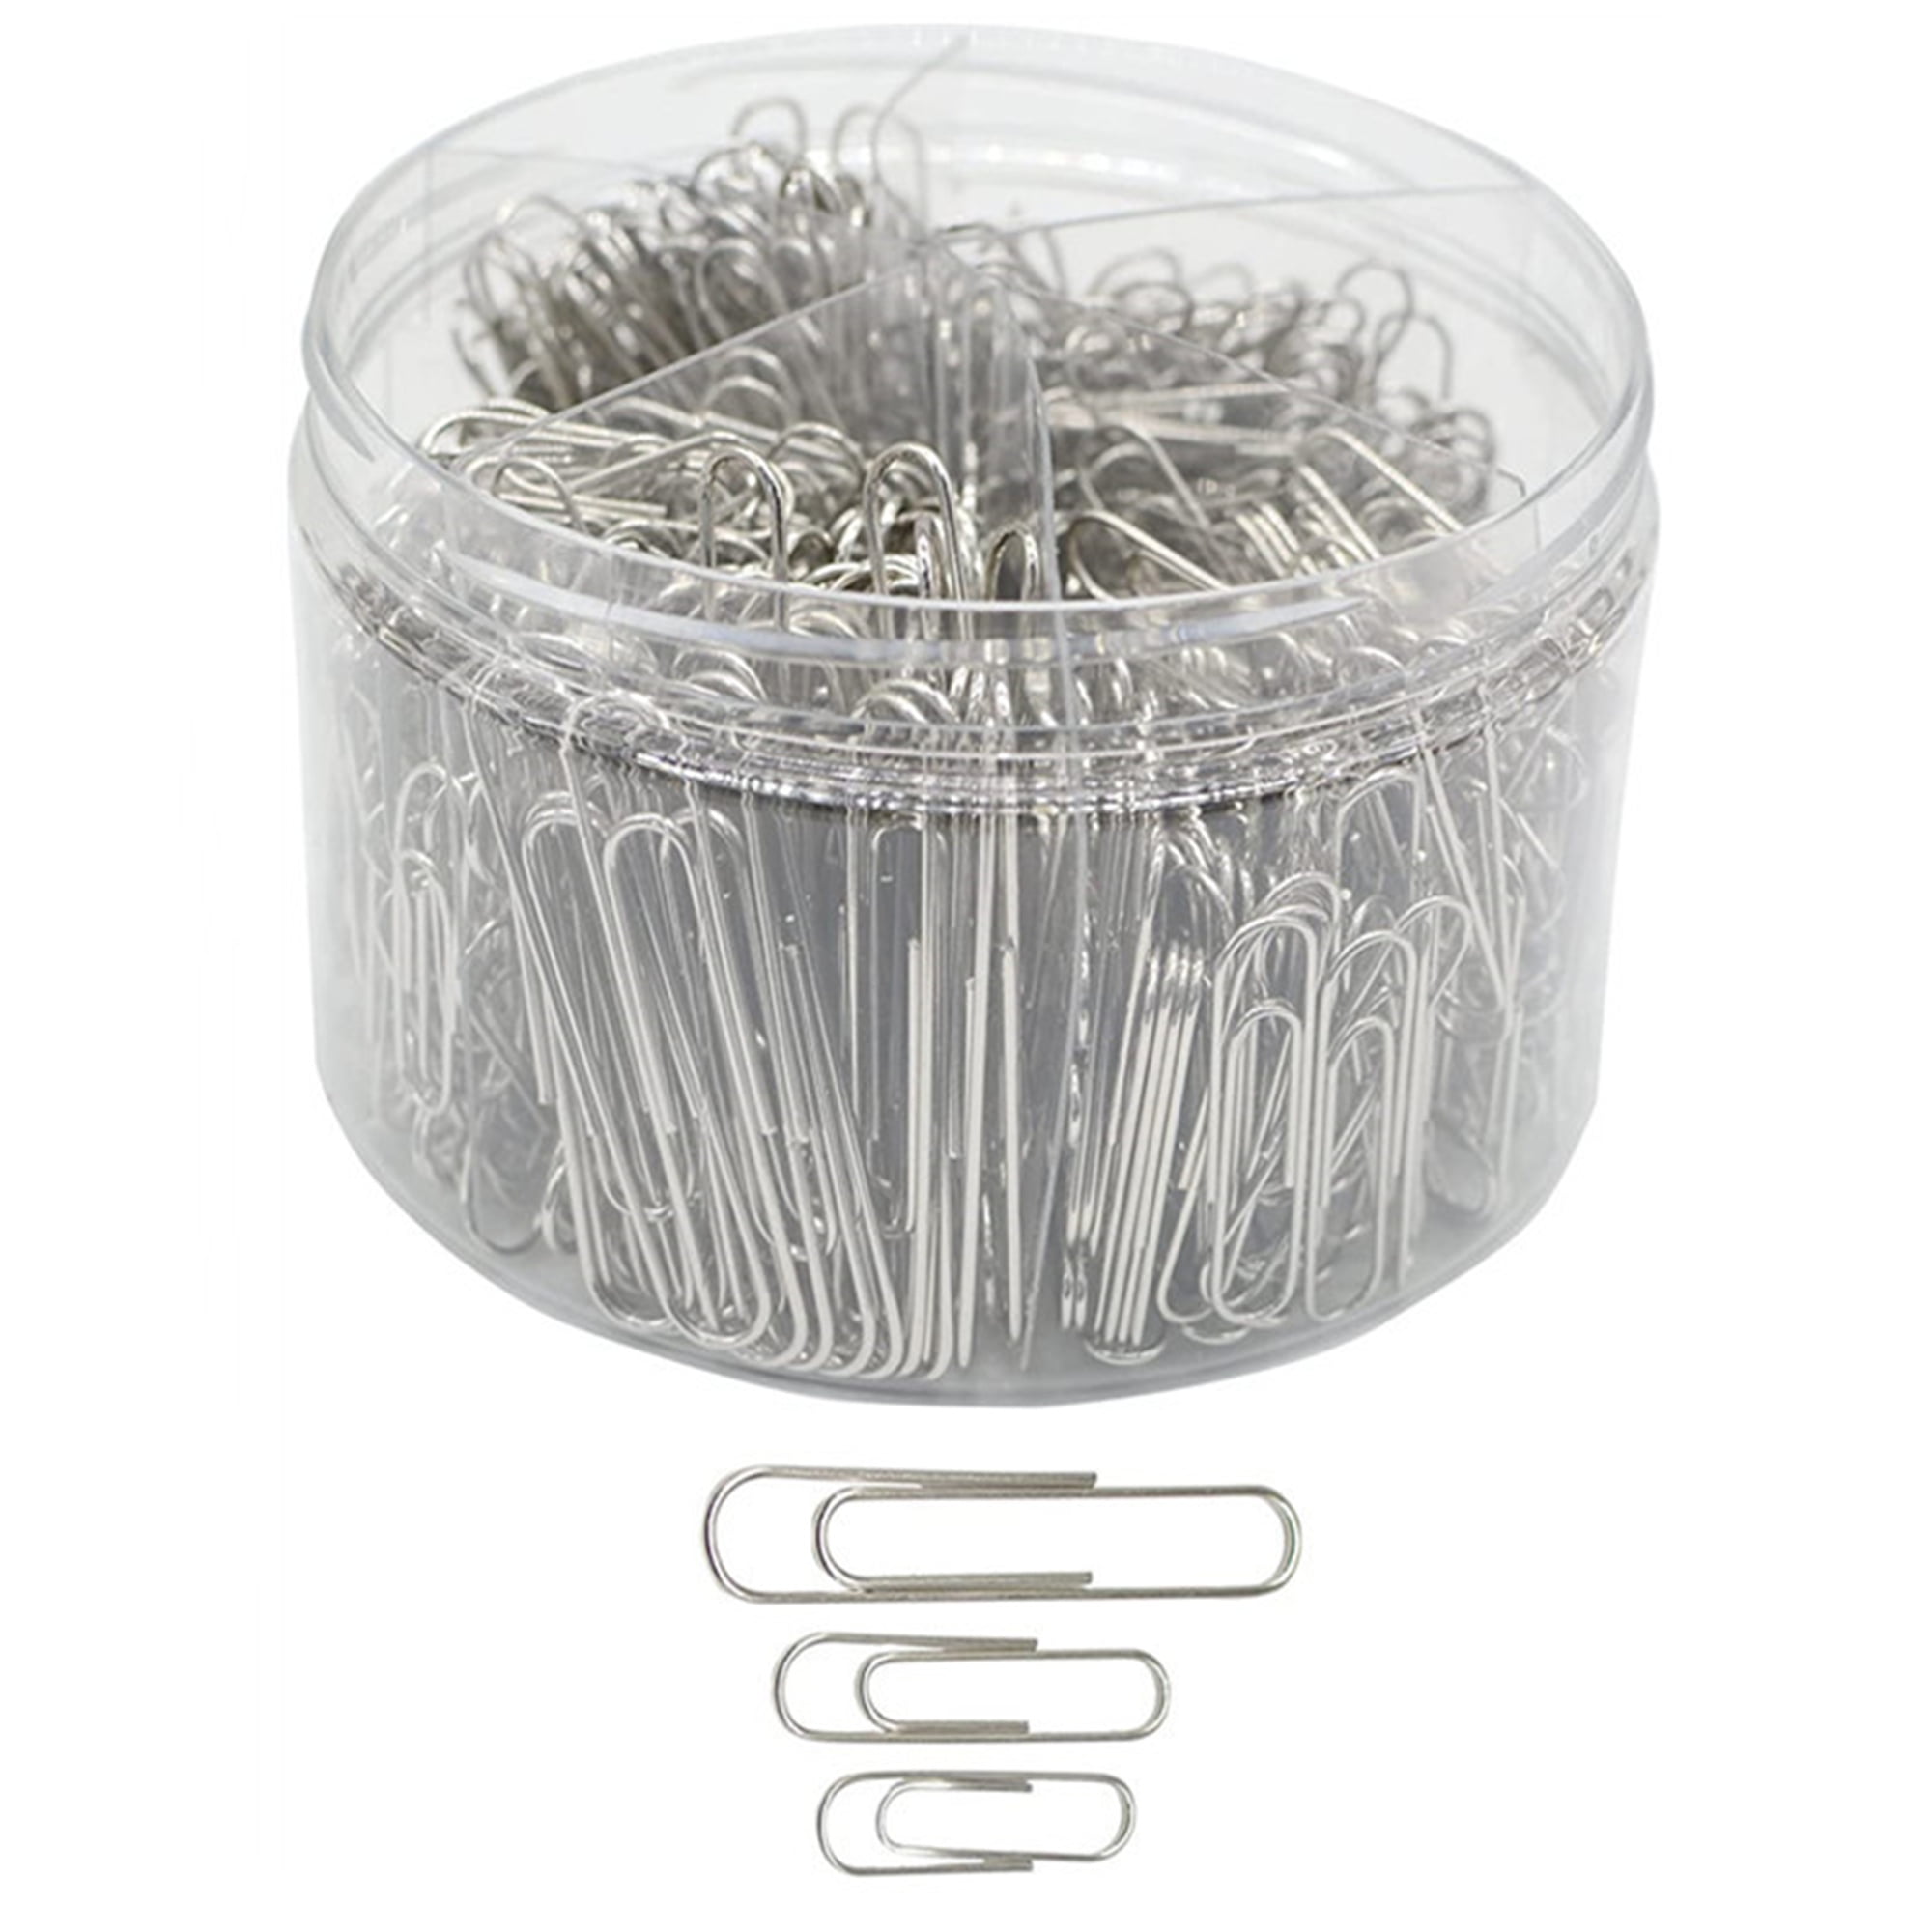 Bazic Silver Paper Clips, No. 1 Regular (33 mm) - 200 count